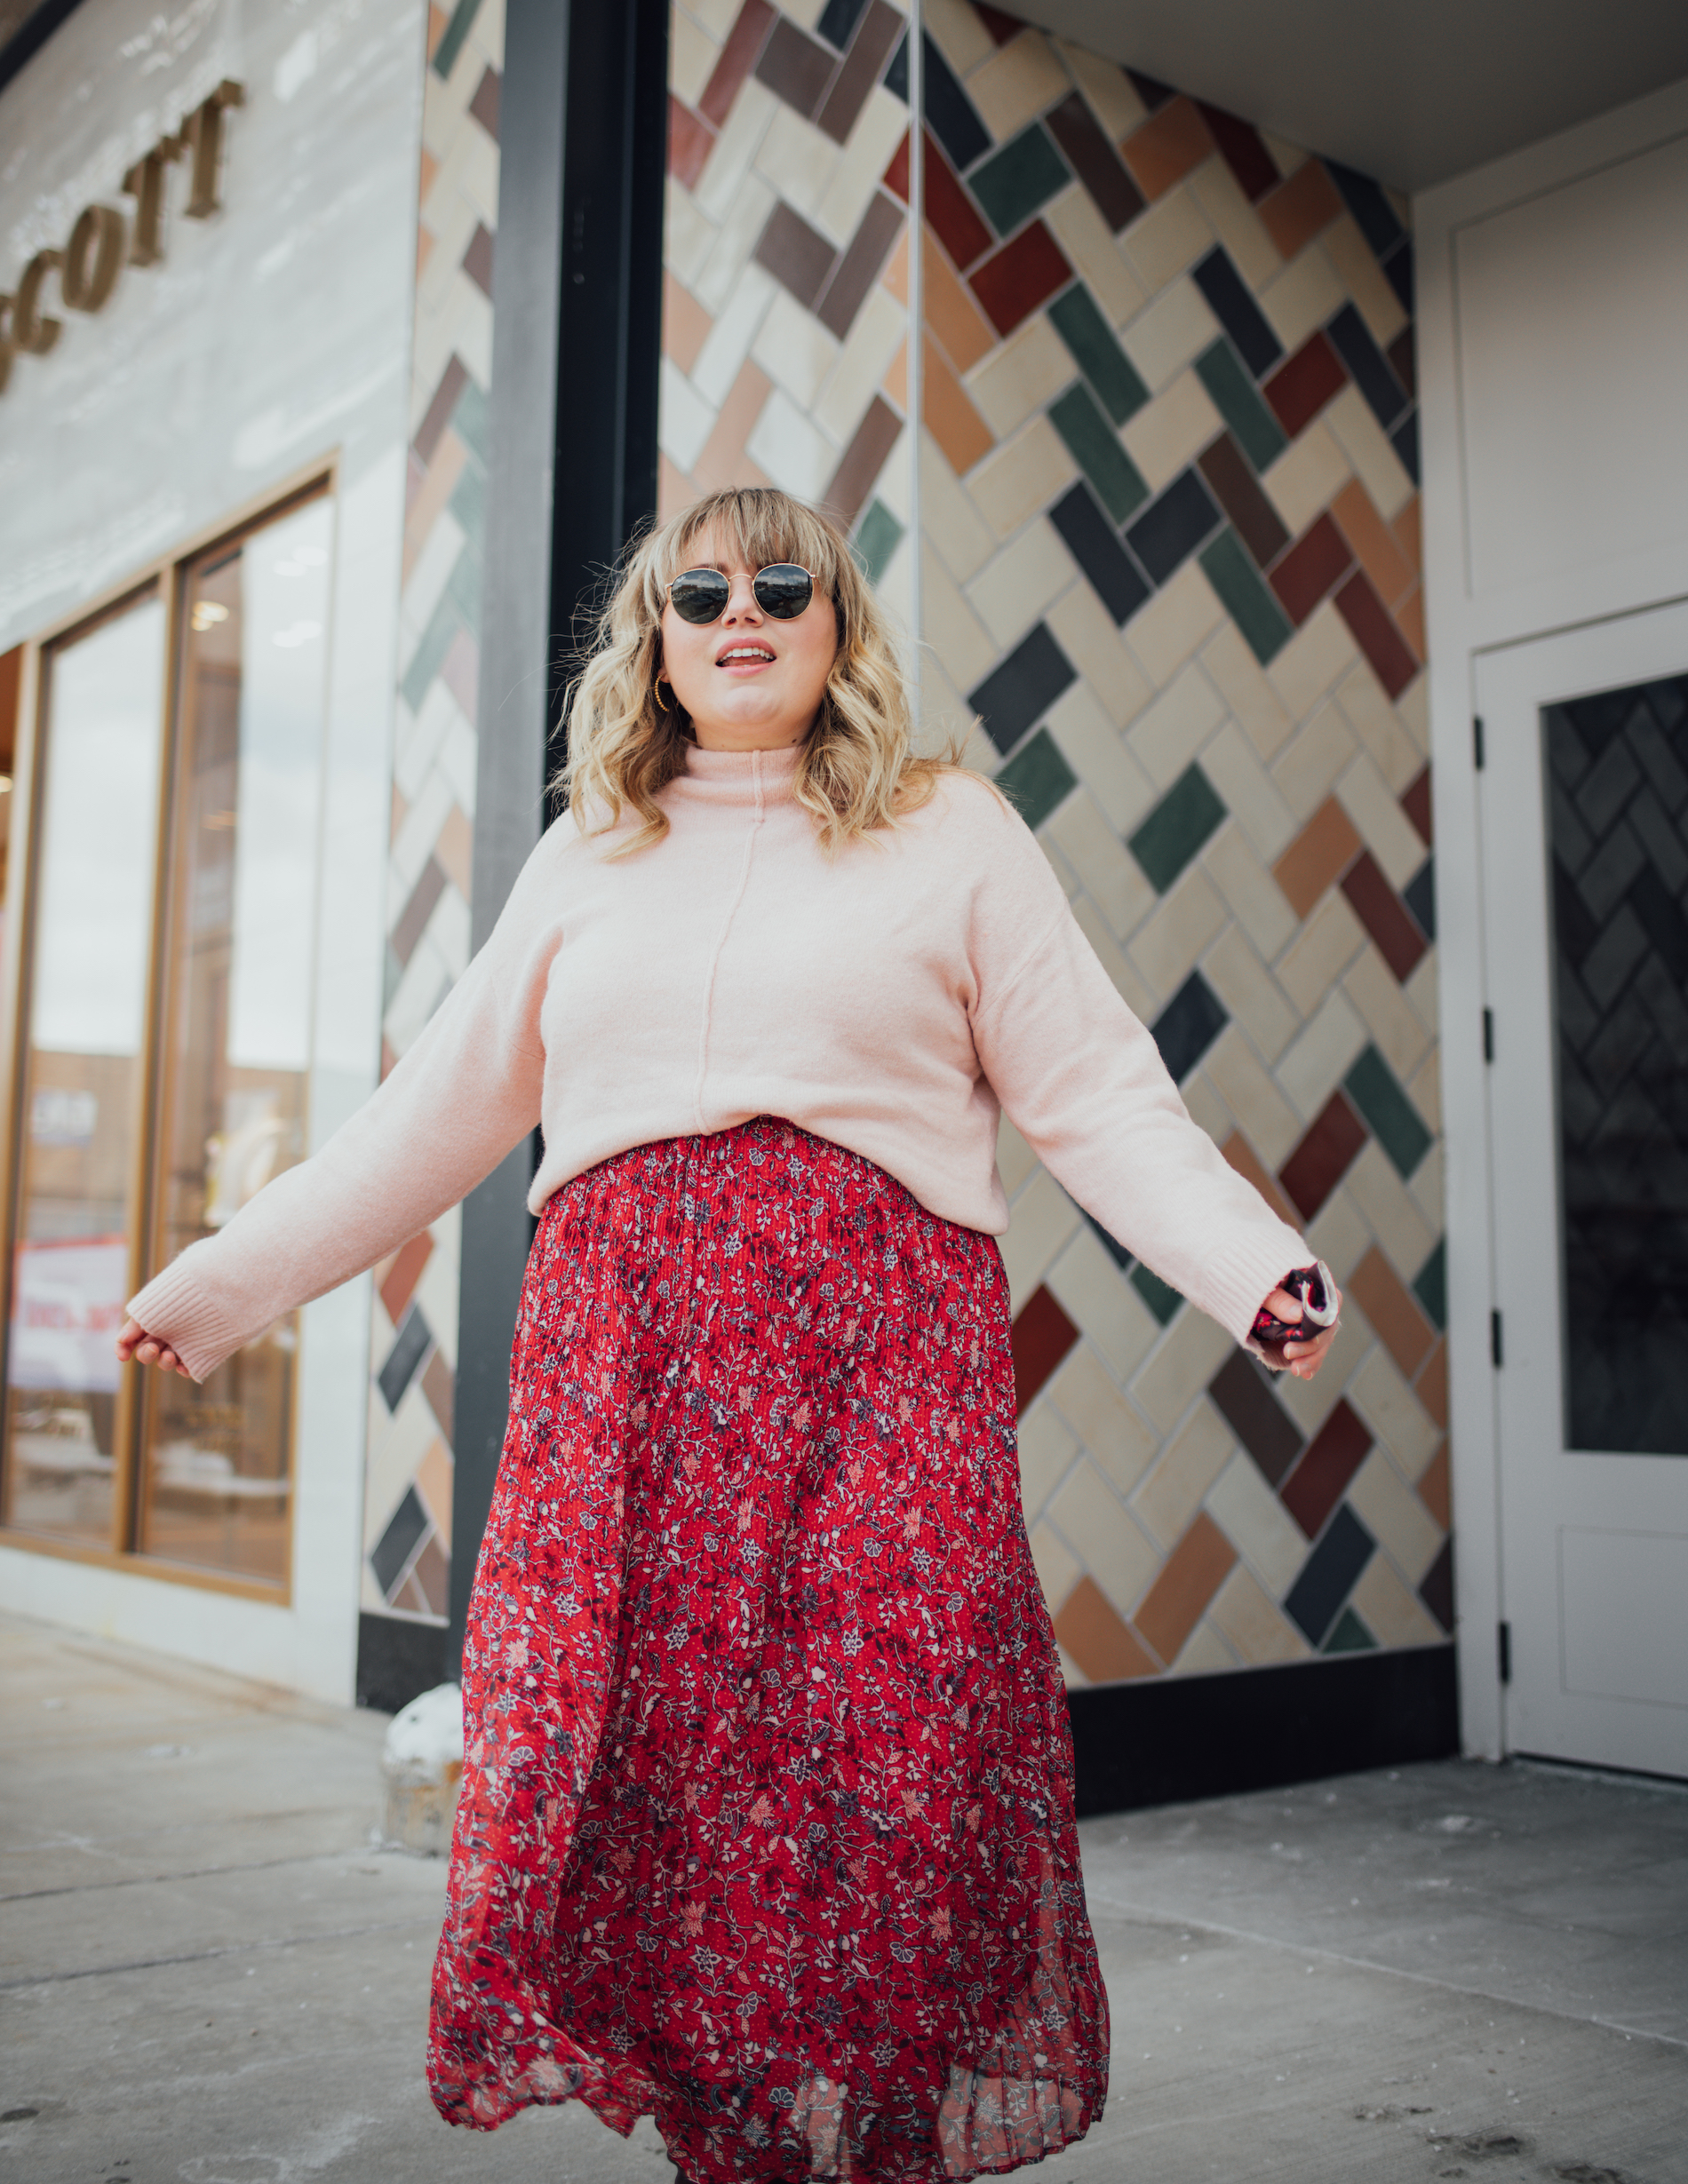 Shopping your closet during a pandemic can be like revisiting the past. In todays post I am challenging you to pull out past favorite outfits. 